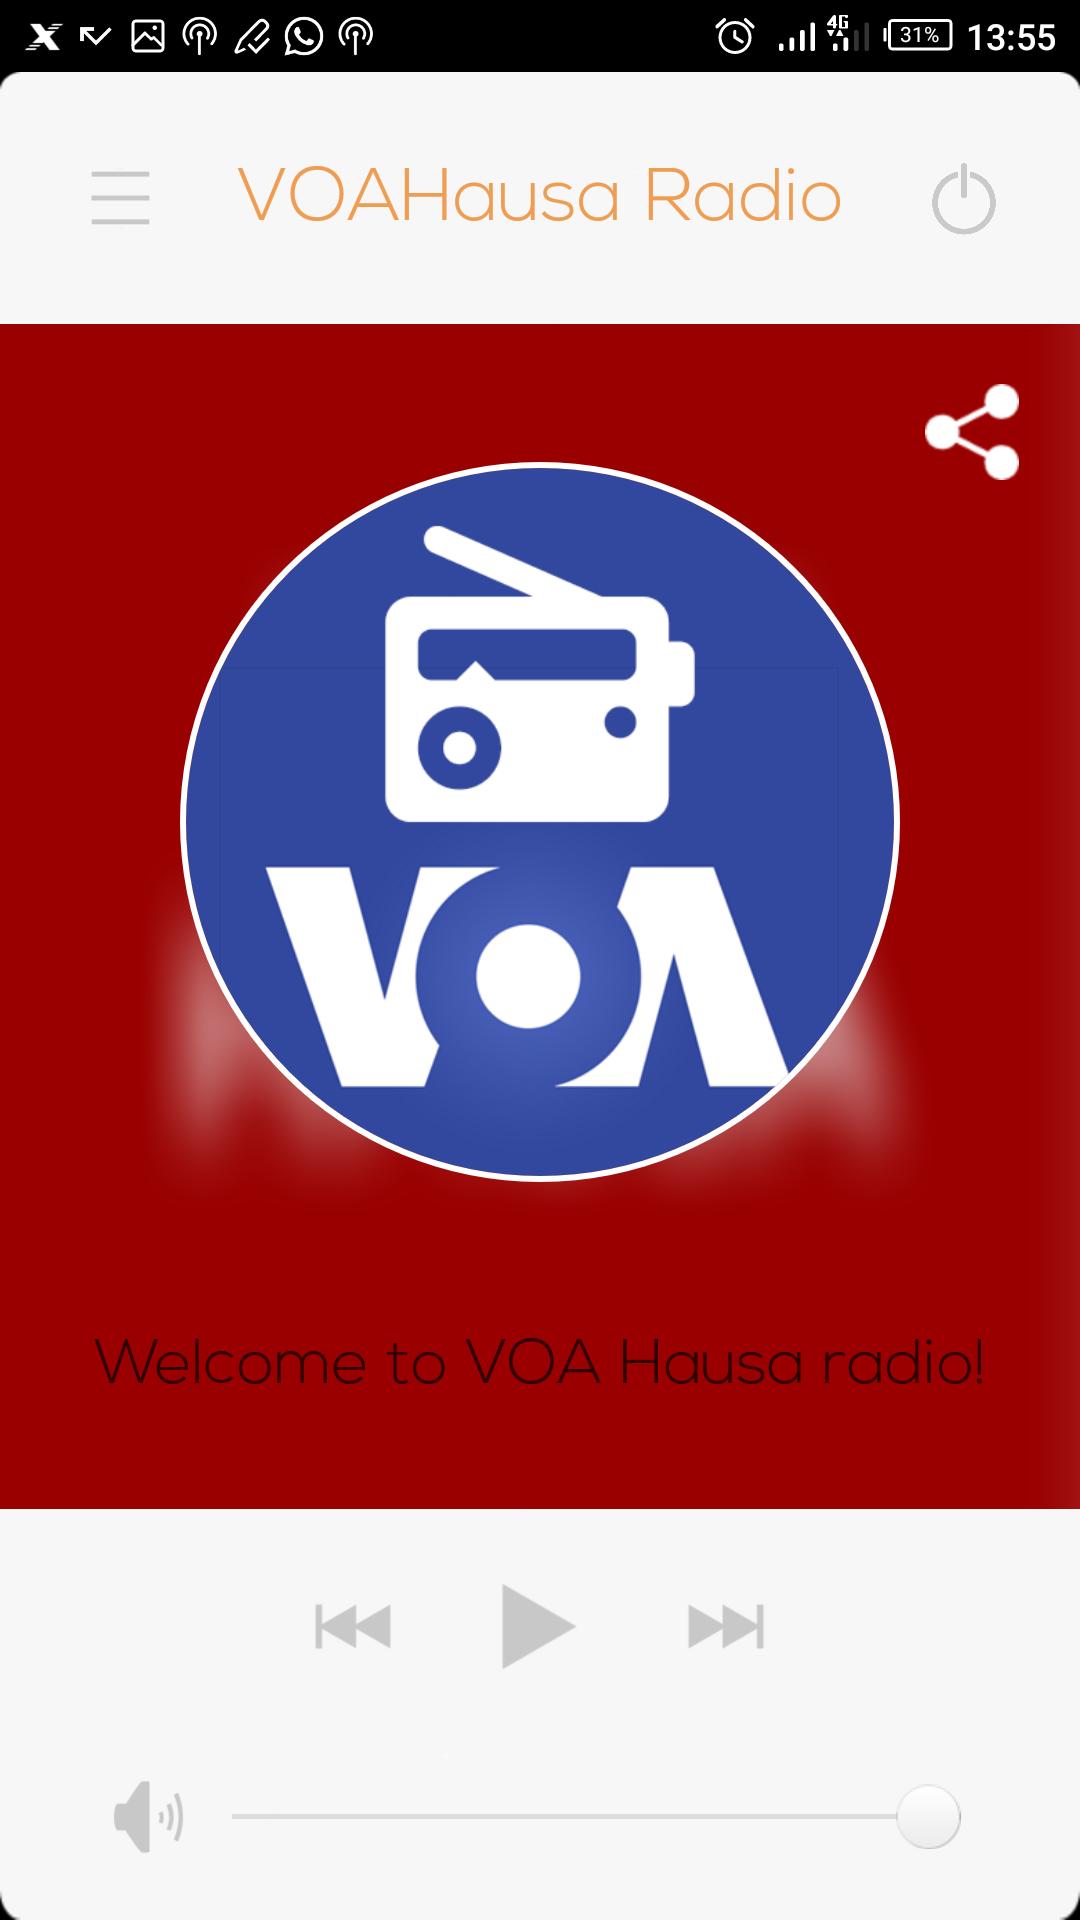 Radio VOA Hausa for Android - APK Download